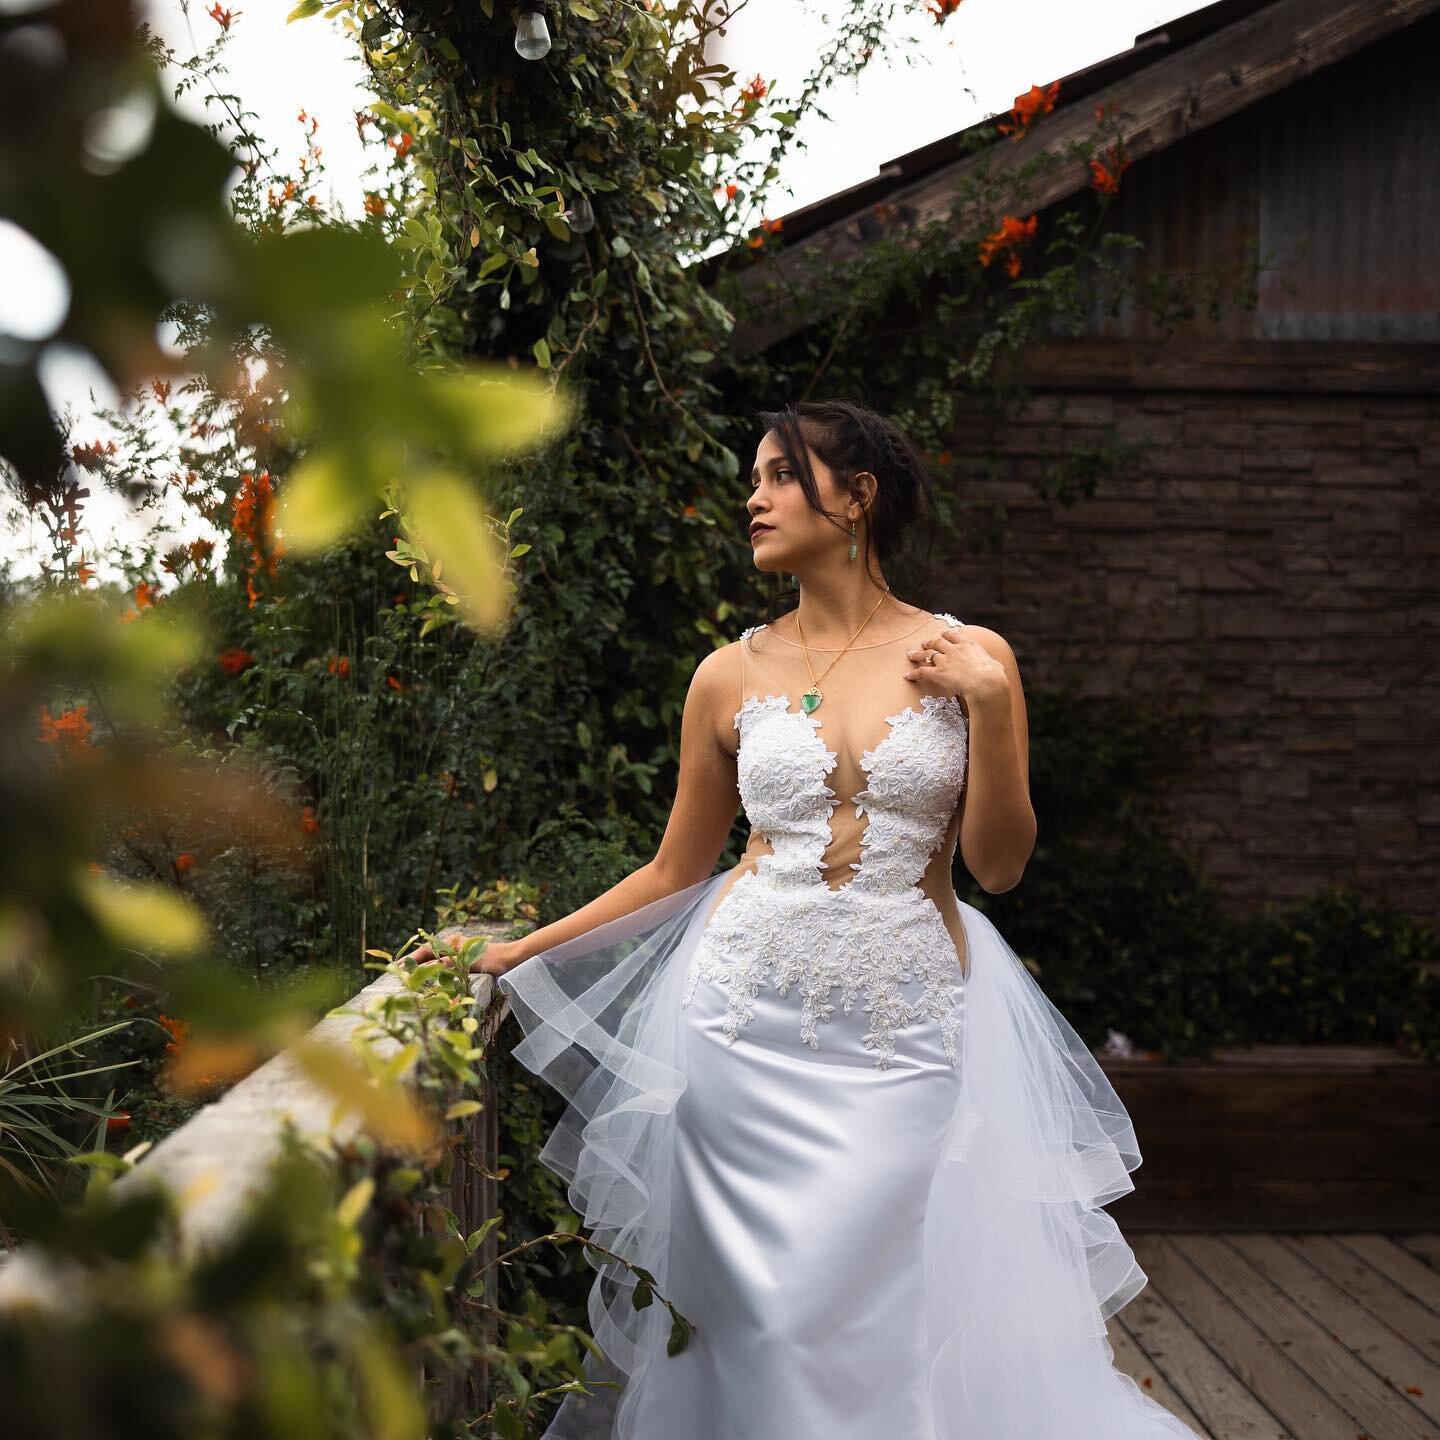 Lost in the melodies of her emotions, she stands at the crossroads of past and future. With every breath, she inhales the memories that shaped her and exhales the anticipation of what's to come. 

#weddingphotographernearme #weddingphotographyinchica